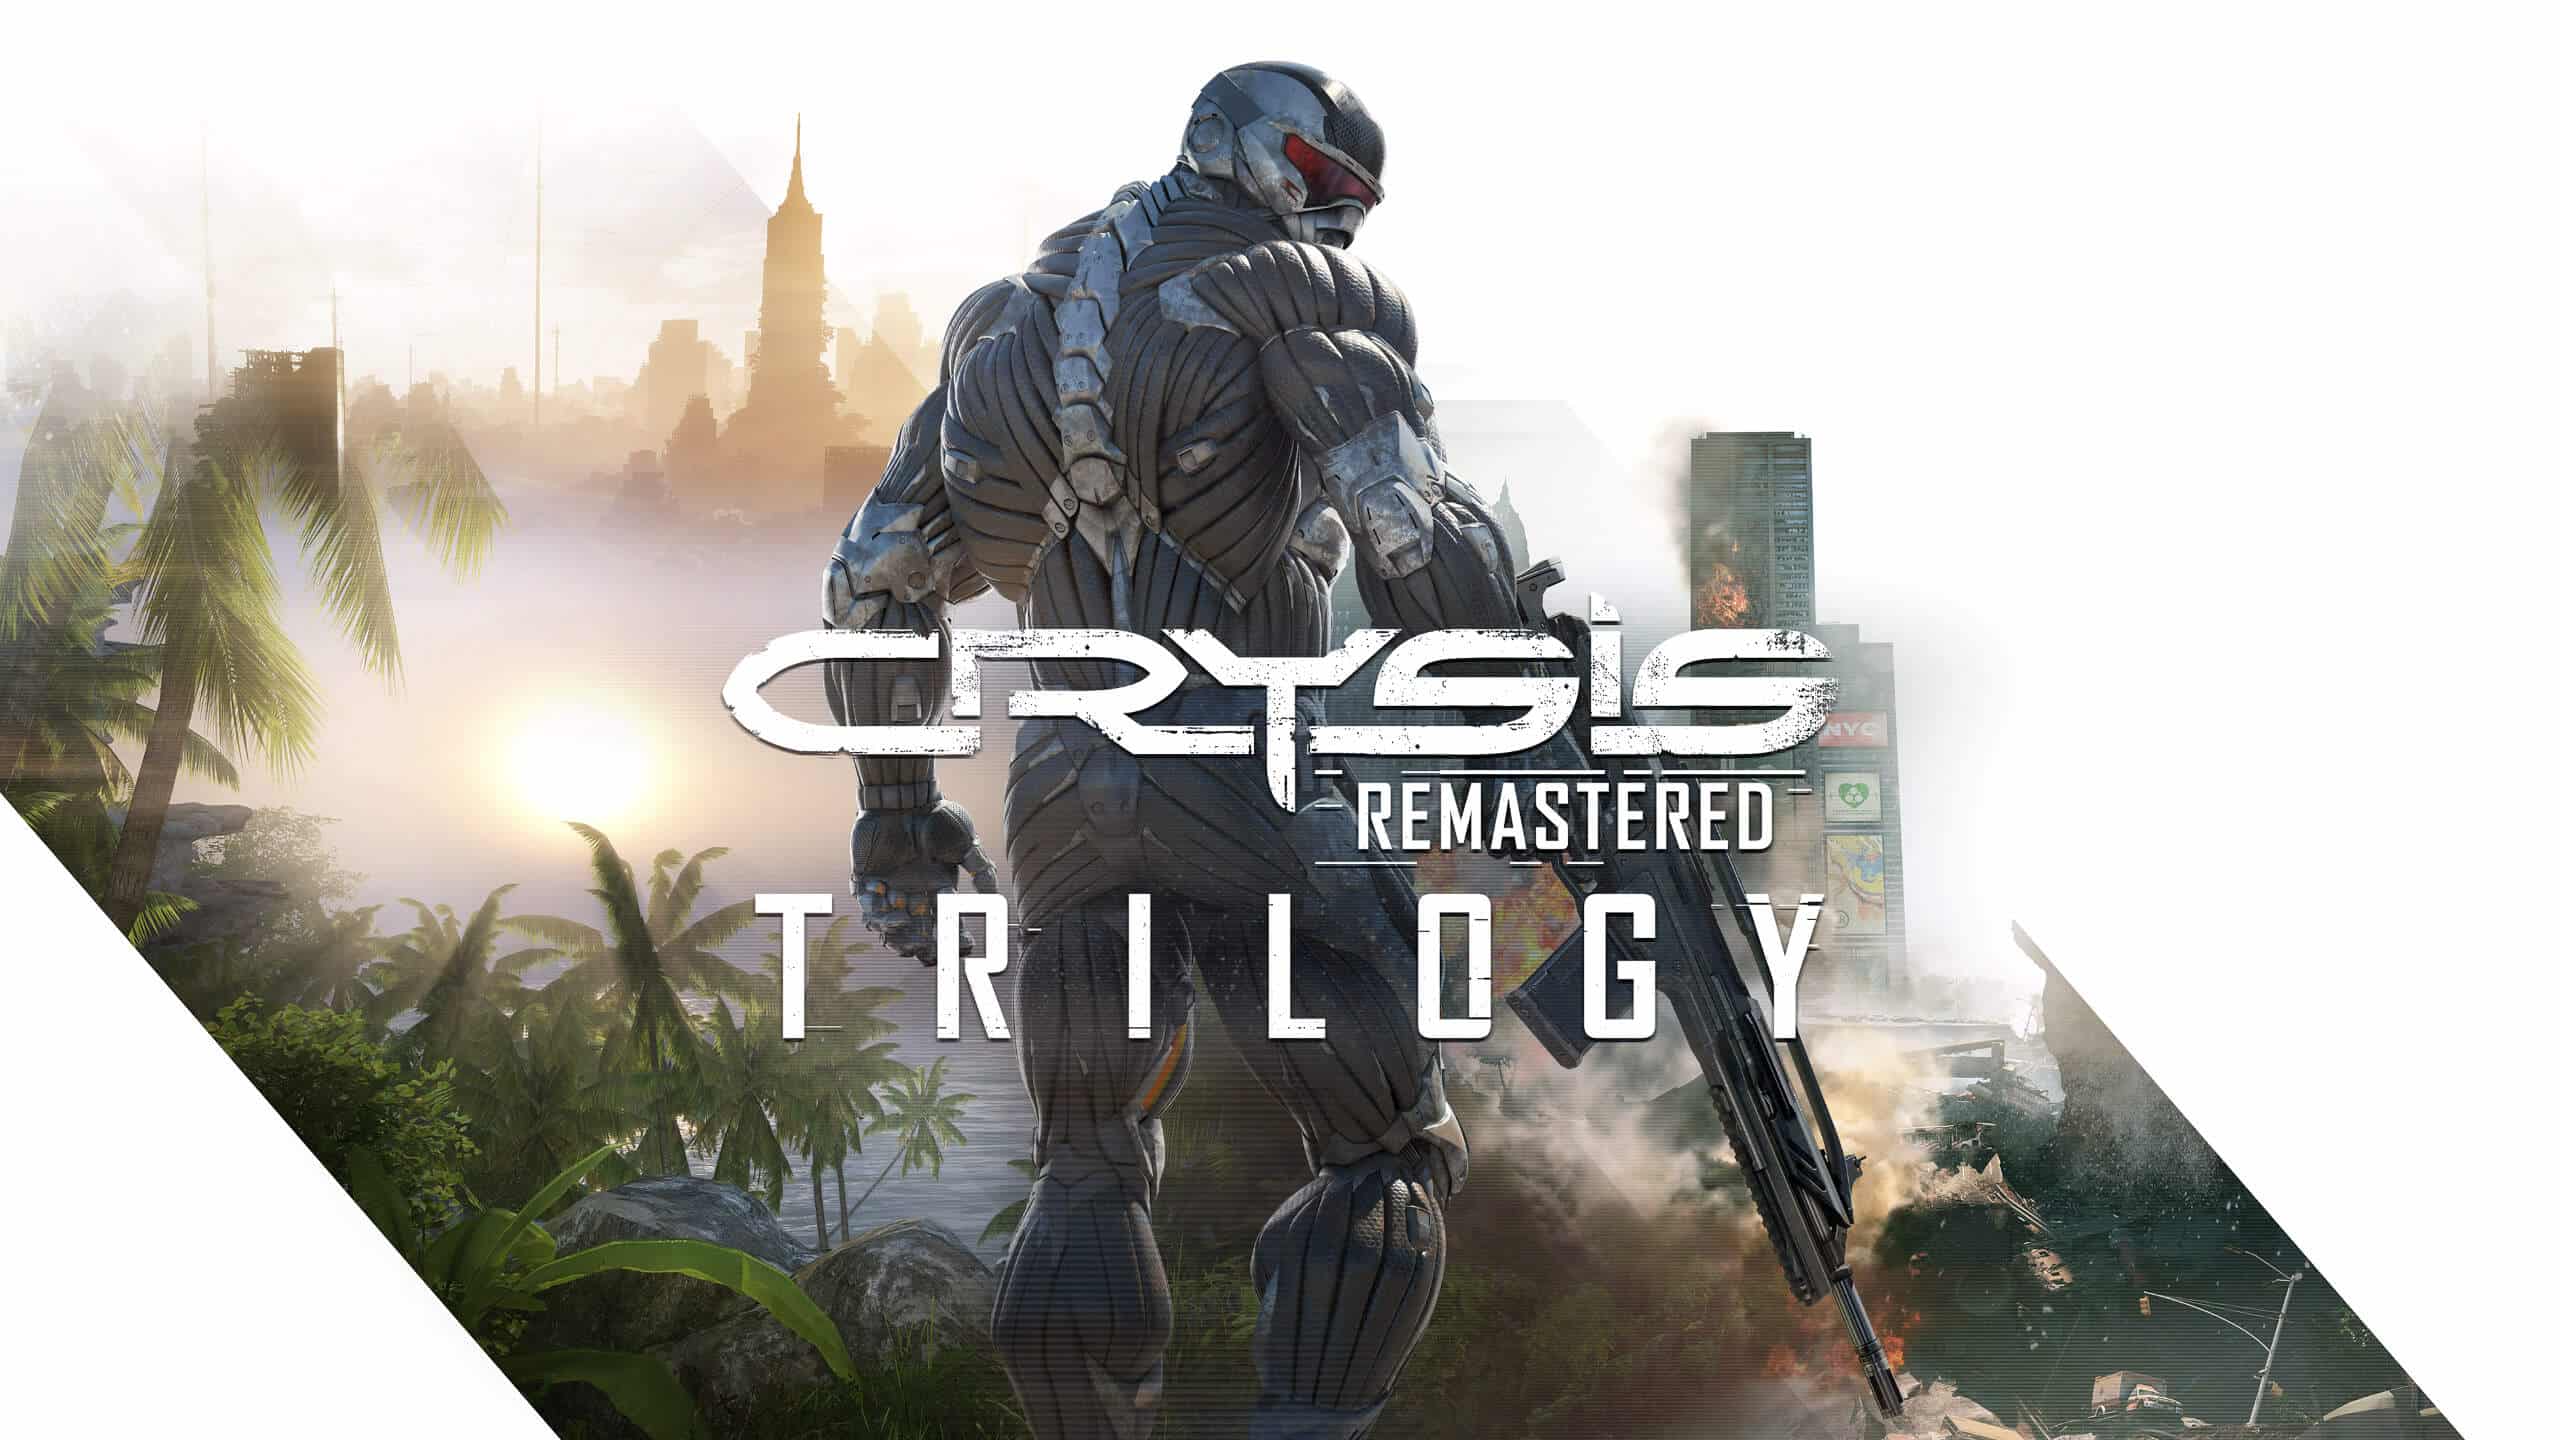 crysis 2 pc cheat table